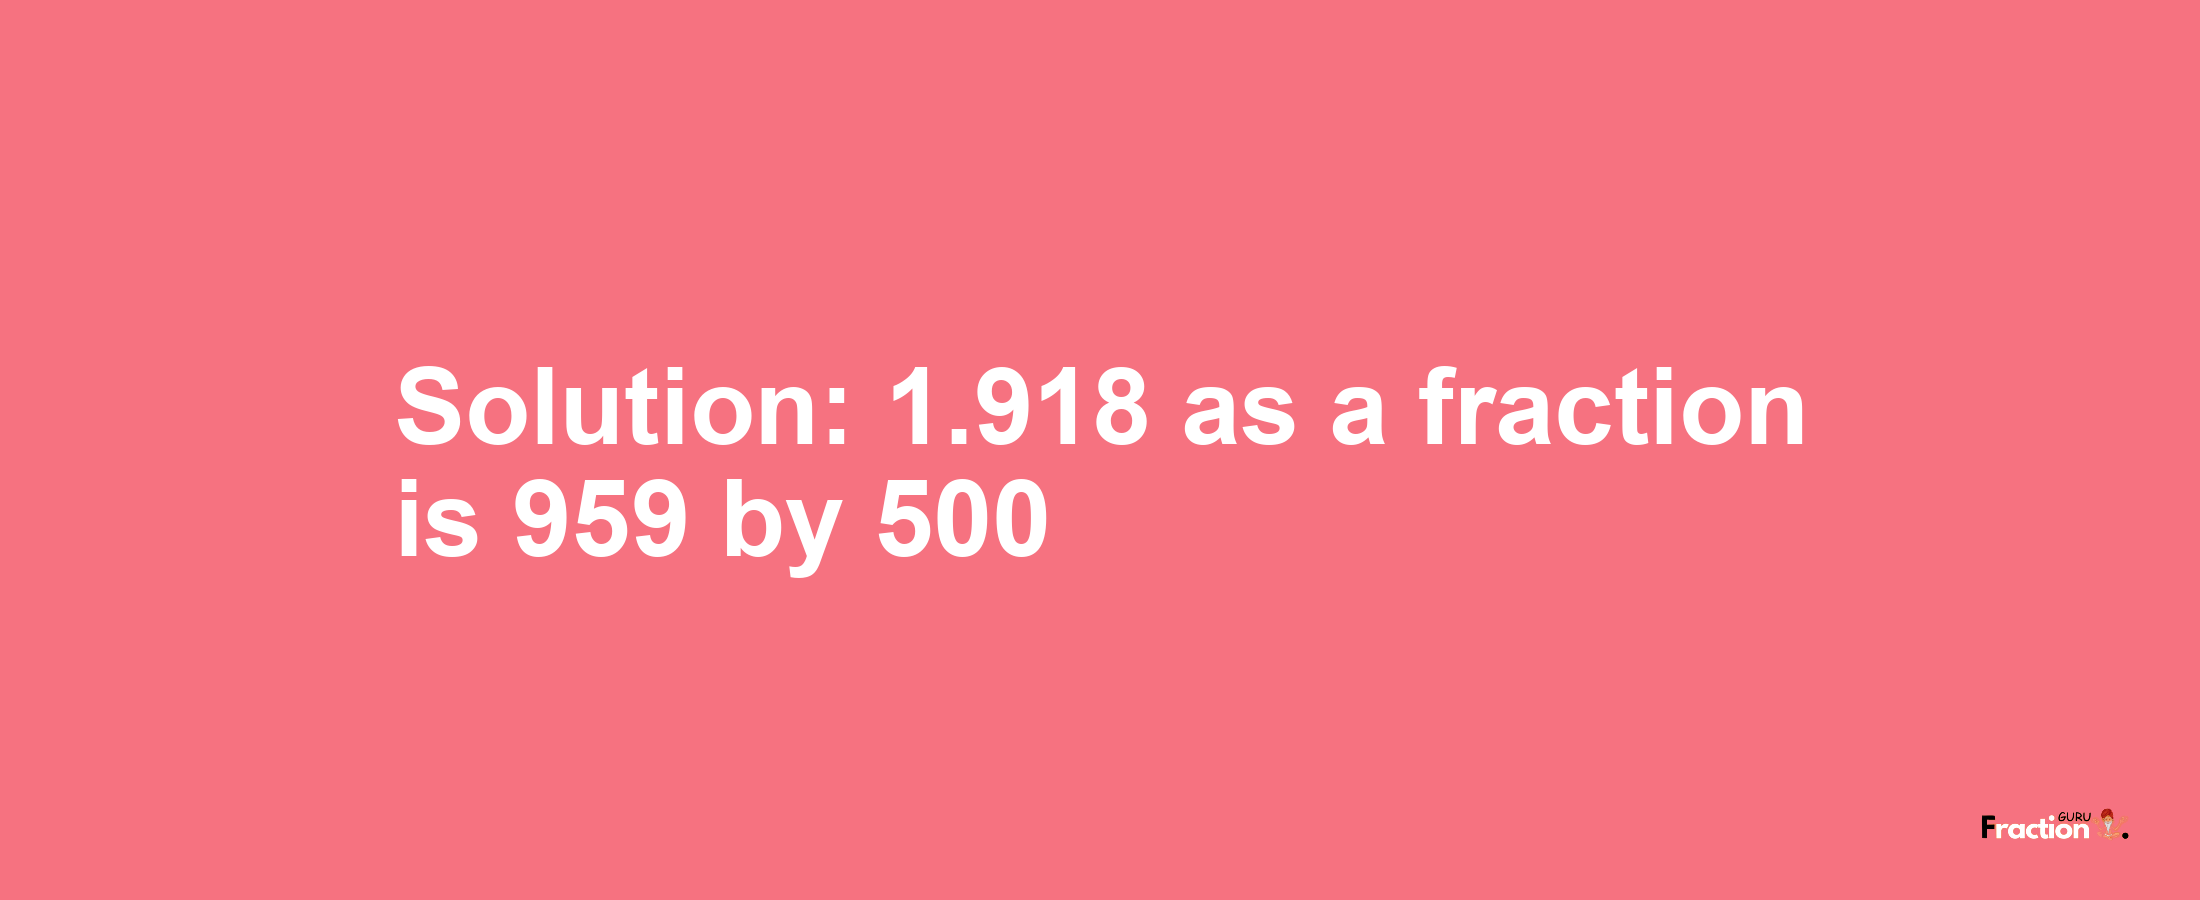 Solution:1.918 as a fraction is 959/500